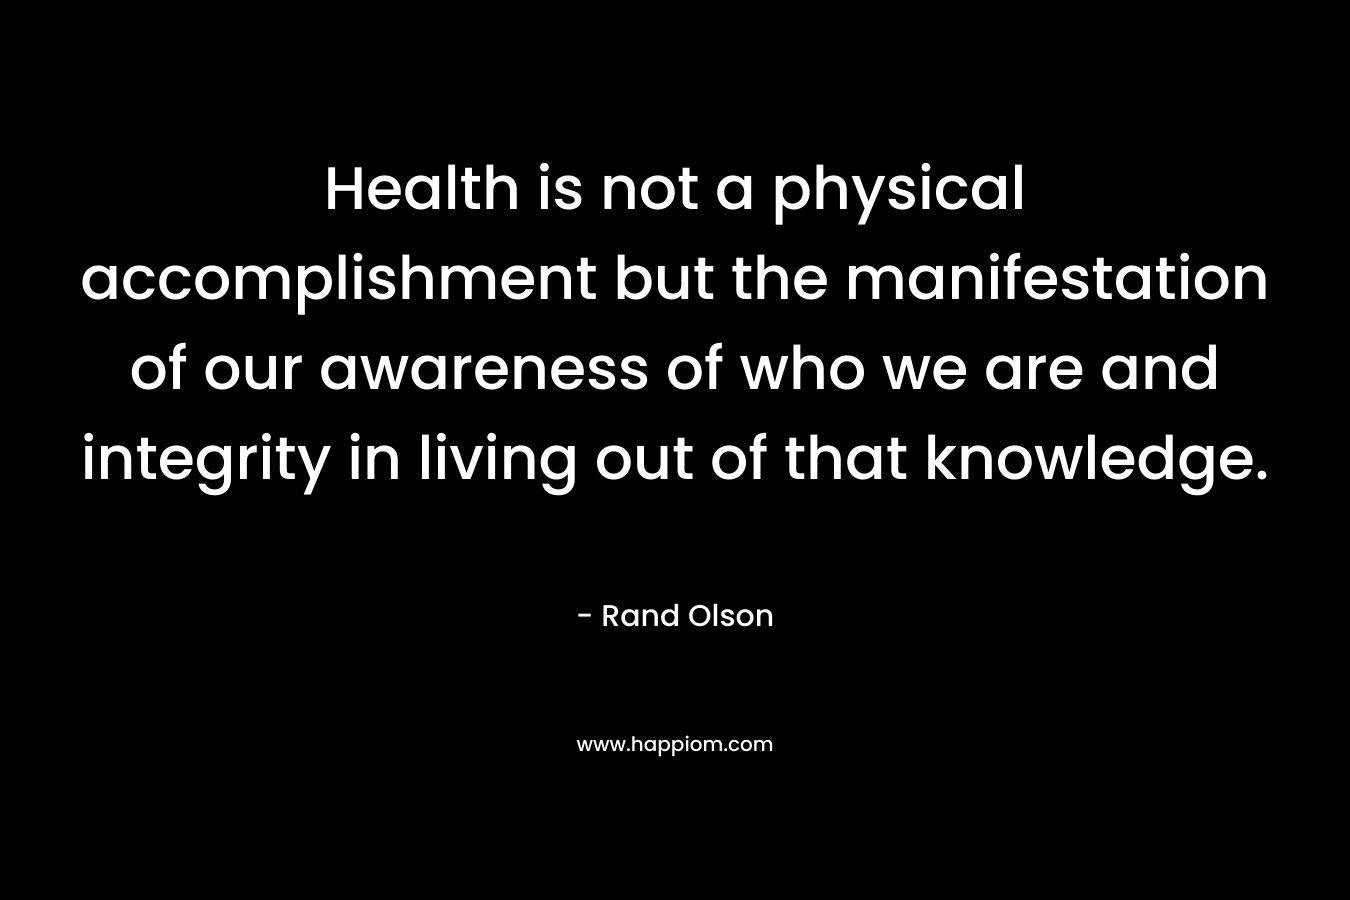 Health is not a physical accomplishment but the manifestation of our awareness of who we are and integrity in living out of that knowledge.